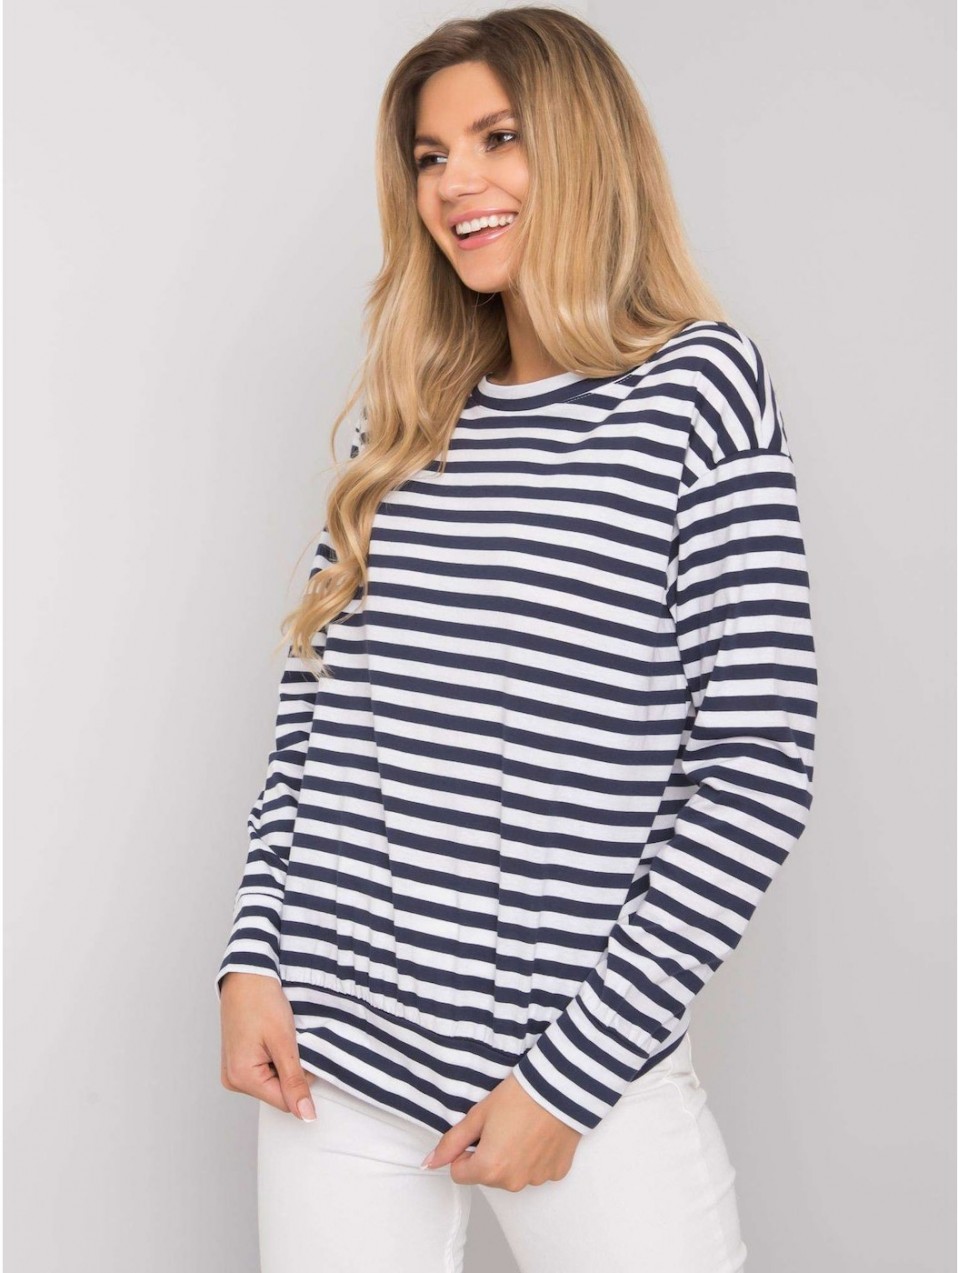 Navy and white striped blouse by Lainey